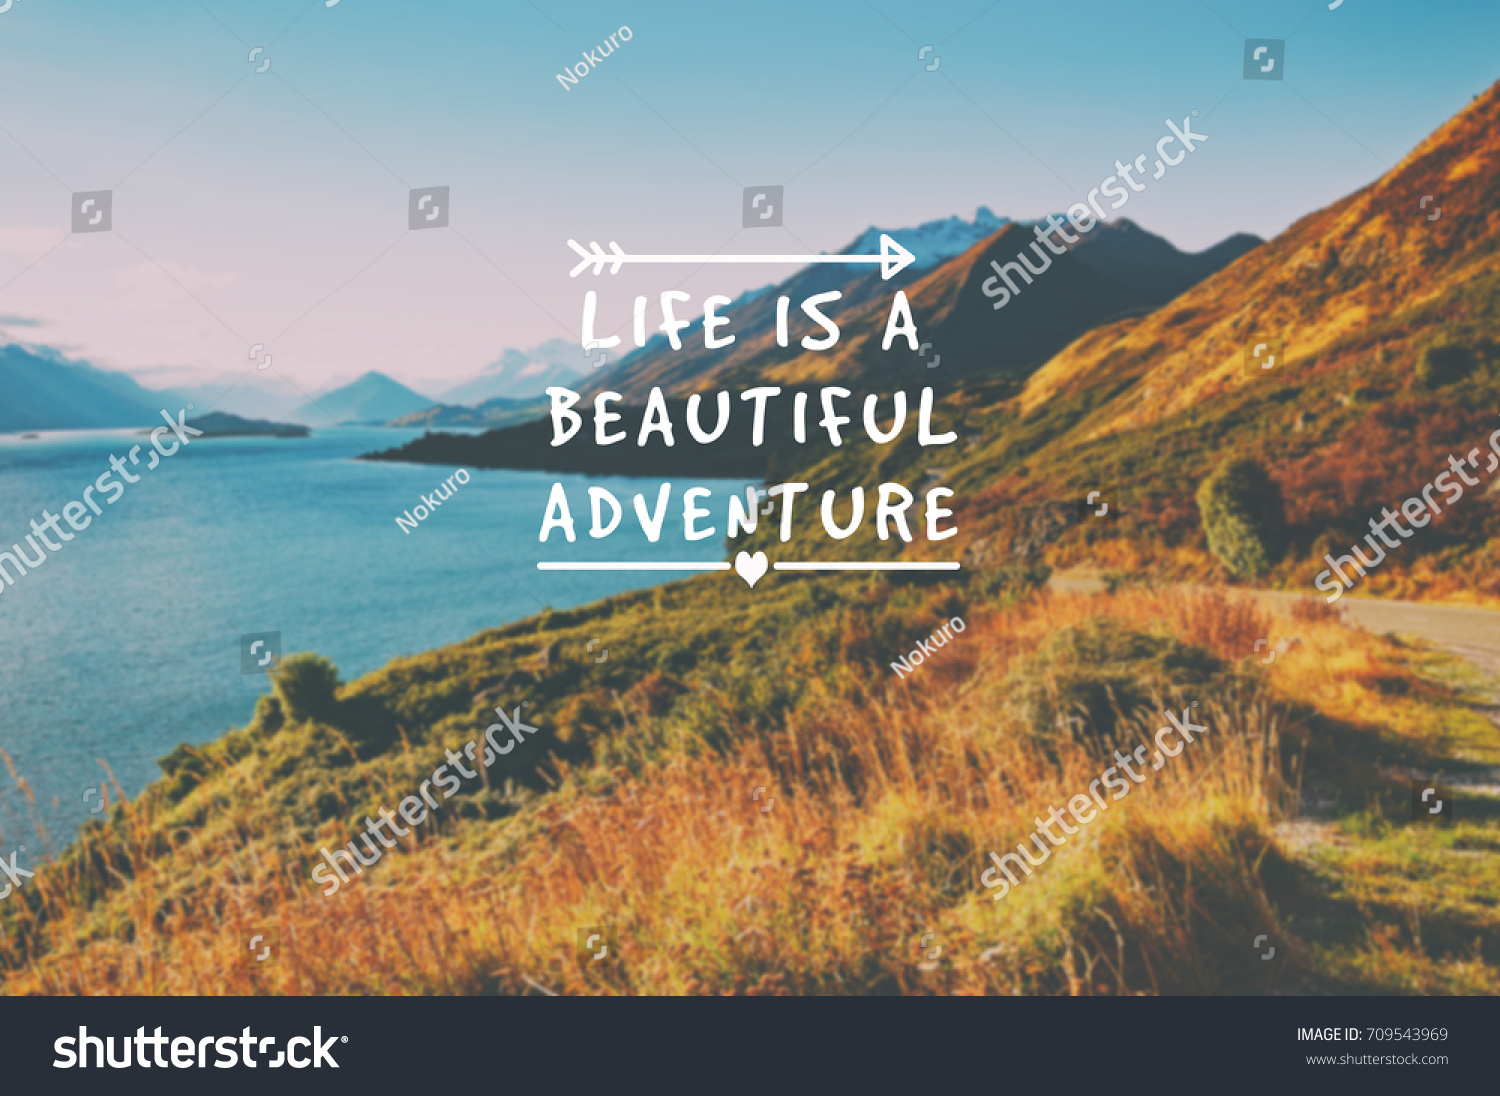 Travel inspirational quotes - Life is a beautiful adventure. Blurry retro styled background. #709543969